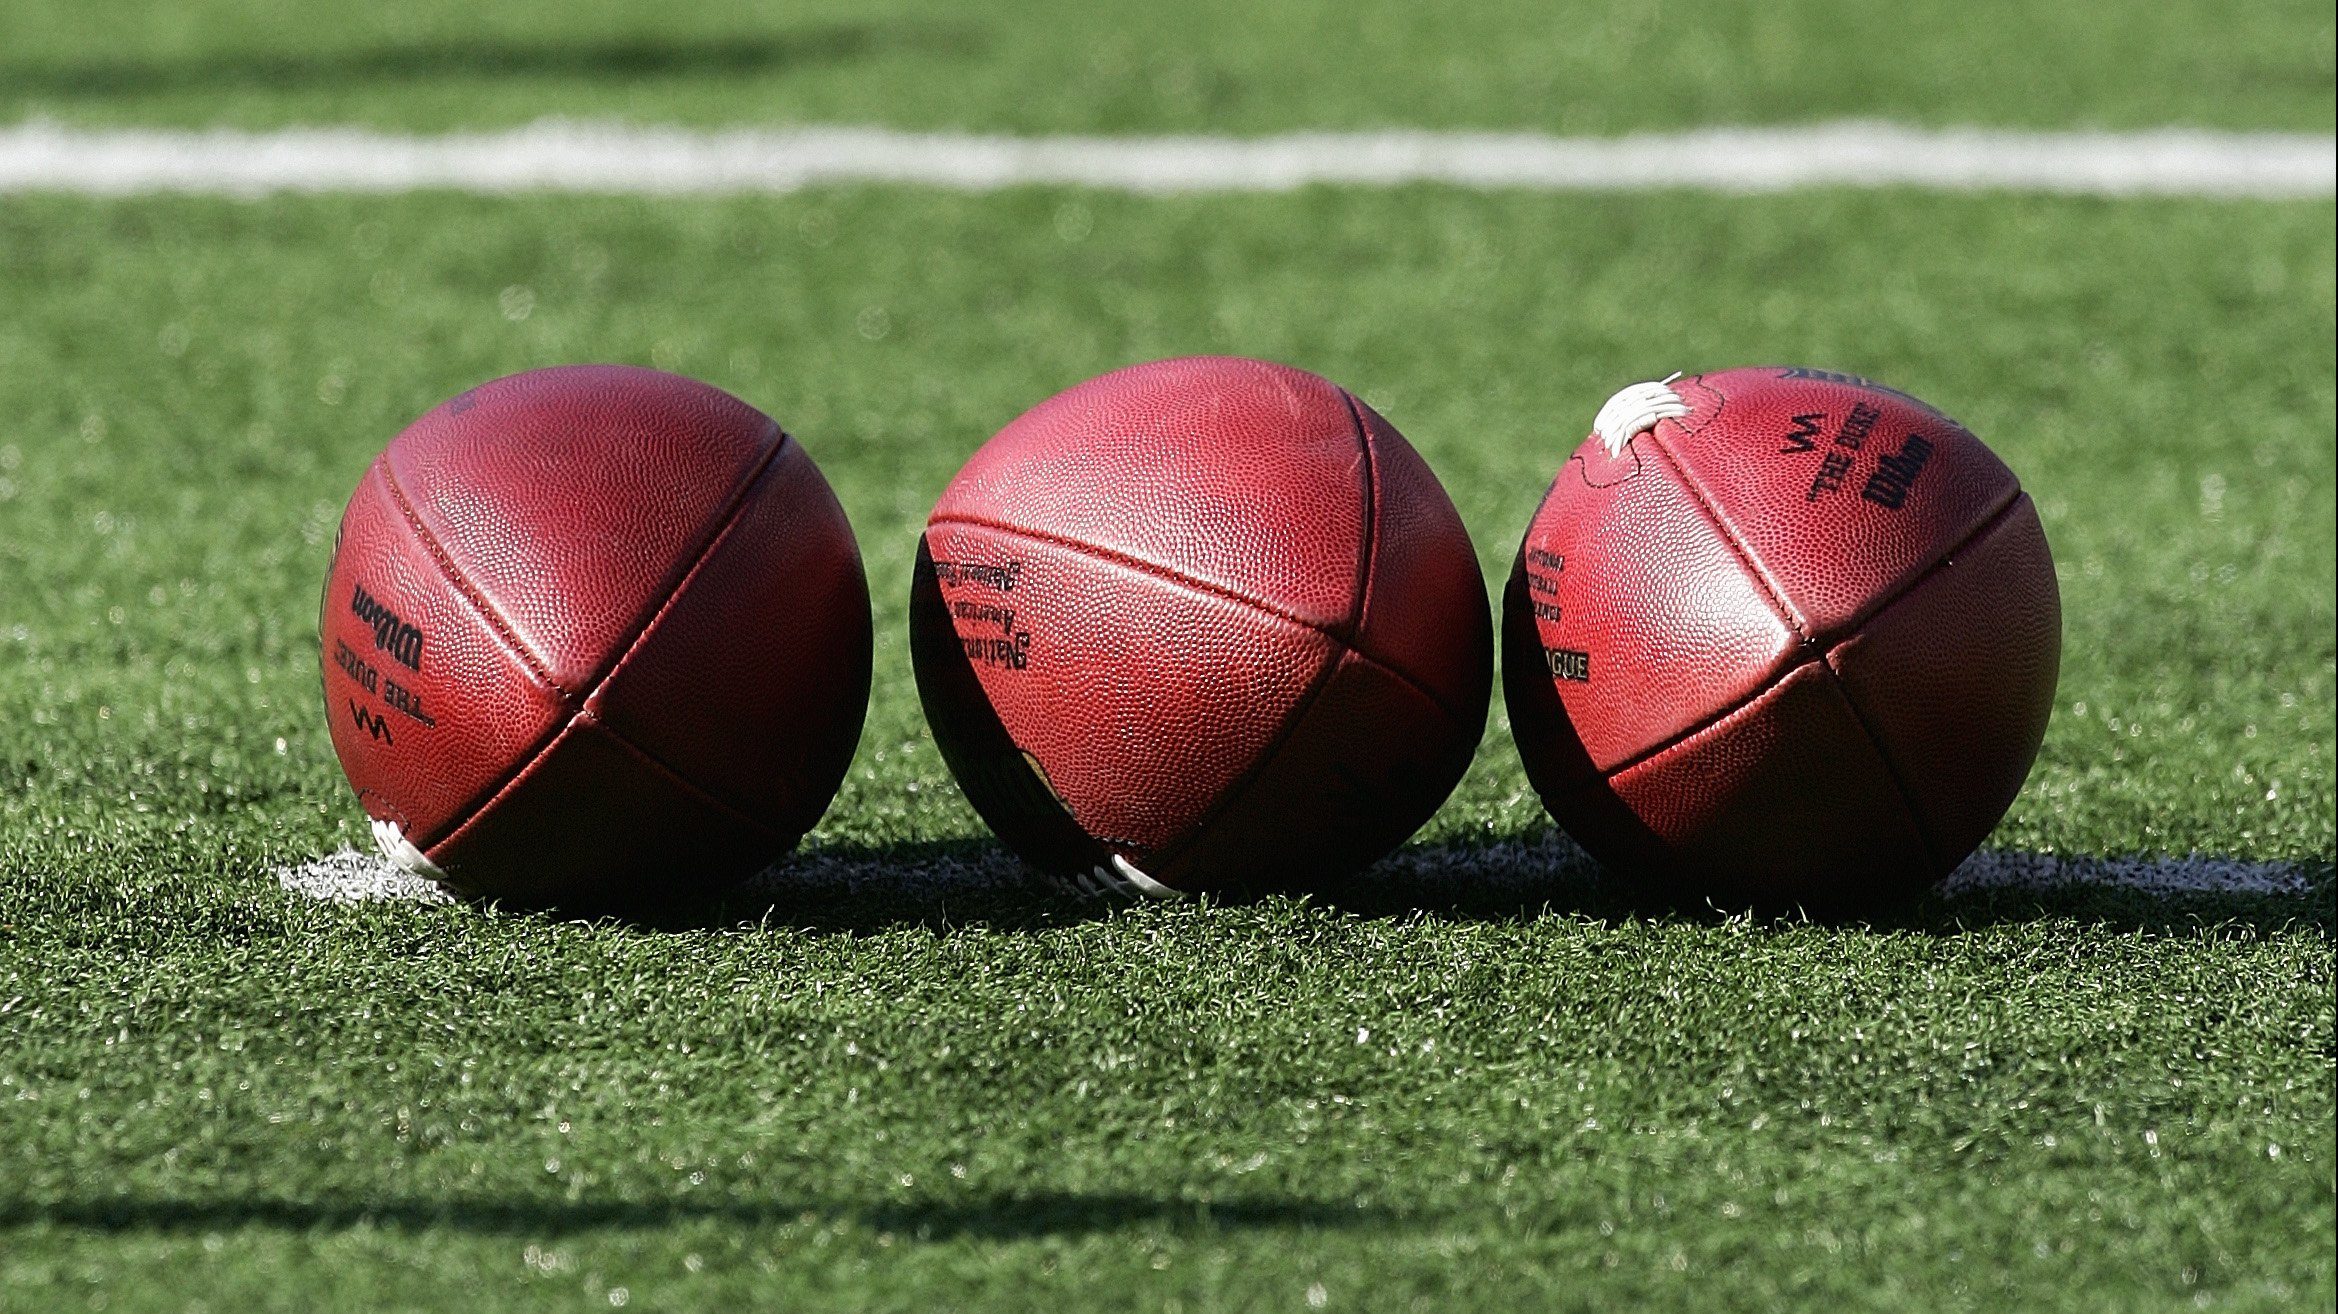 Three footballs lay on the field prior to the game between the Cincinnati Bengals and the Baltimore Ravens at M&T Bank Stadium on November 5, 2006 in Baltimore, Maryland.